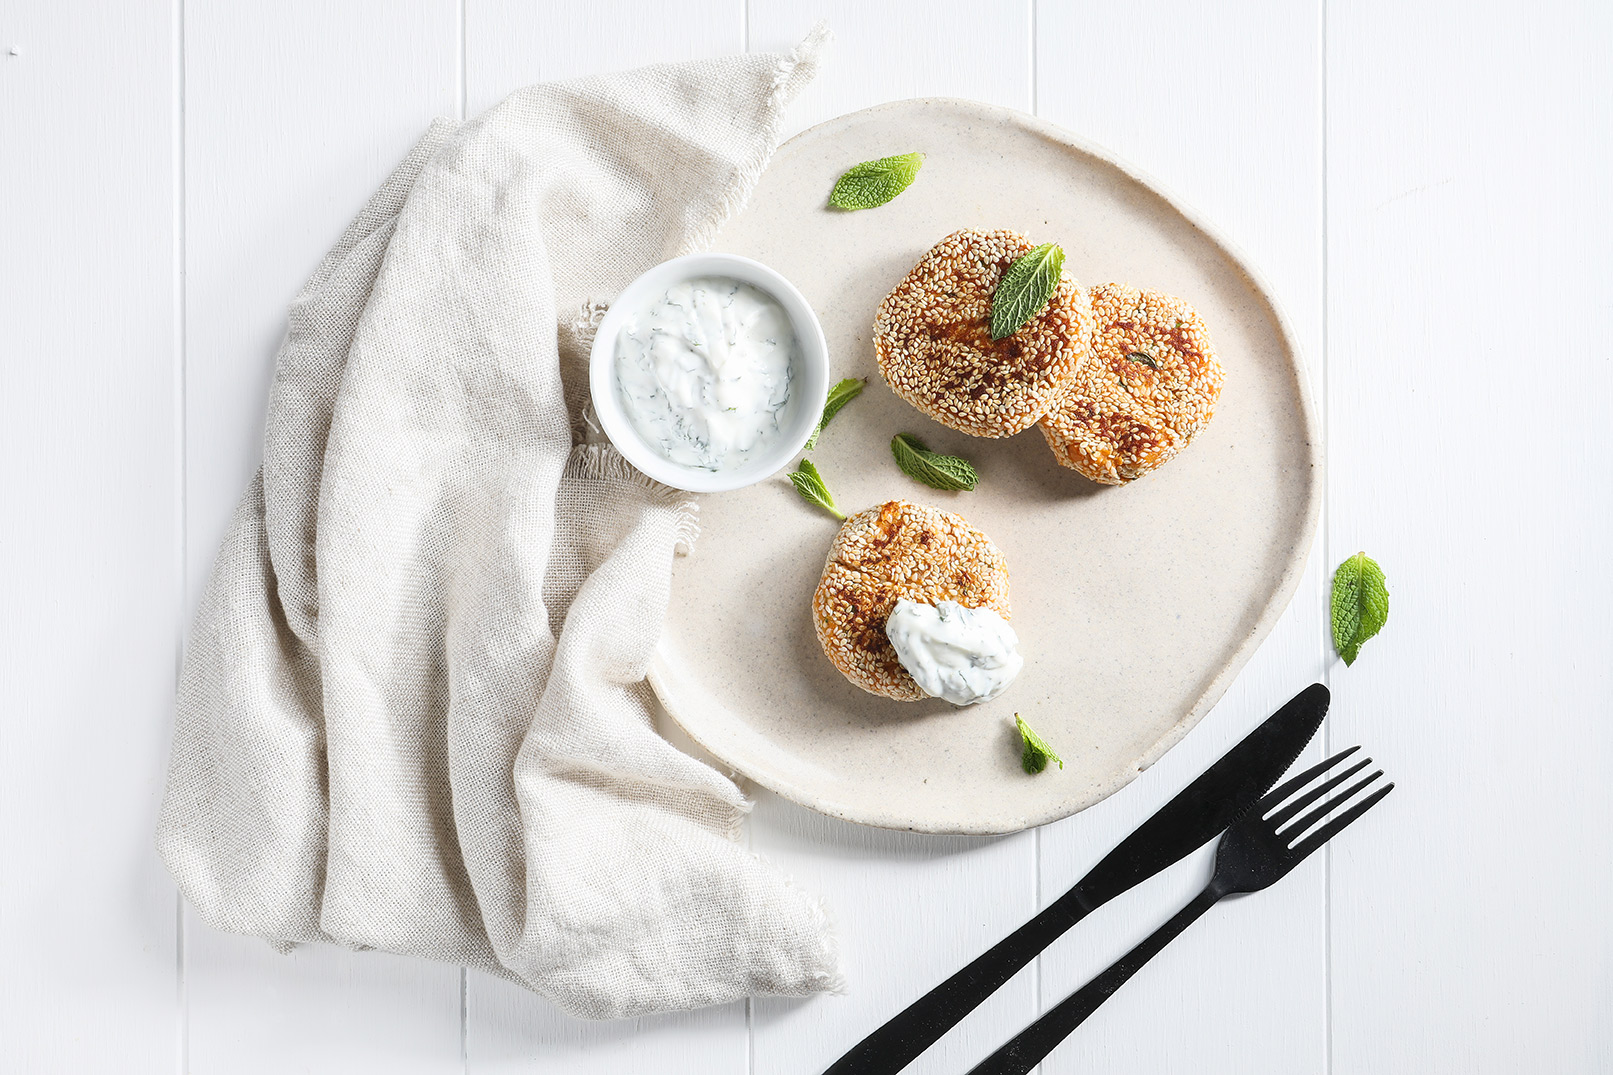 Image of three sweet potato falafels on a large plate with minty yoghurt dip and a knife and fork